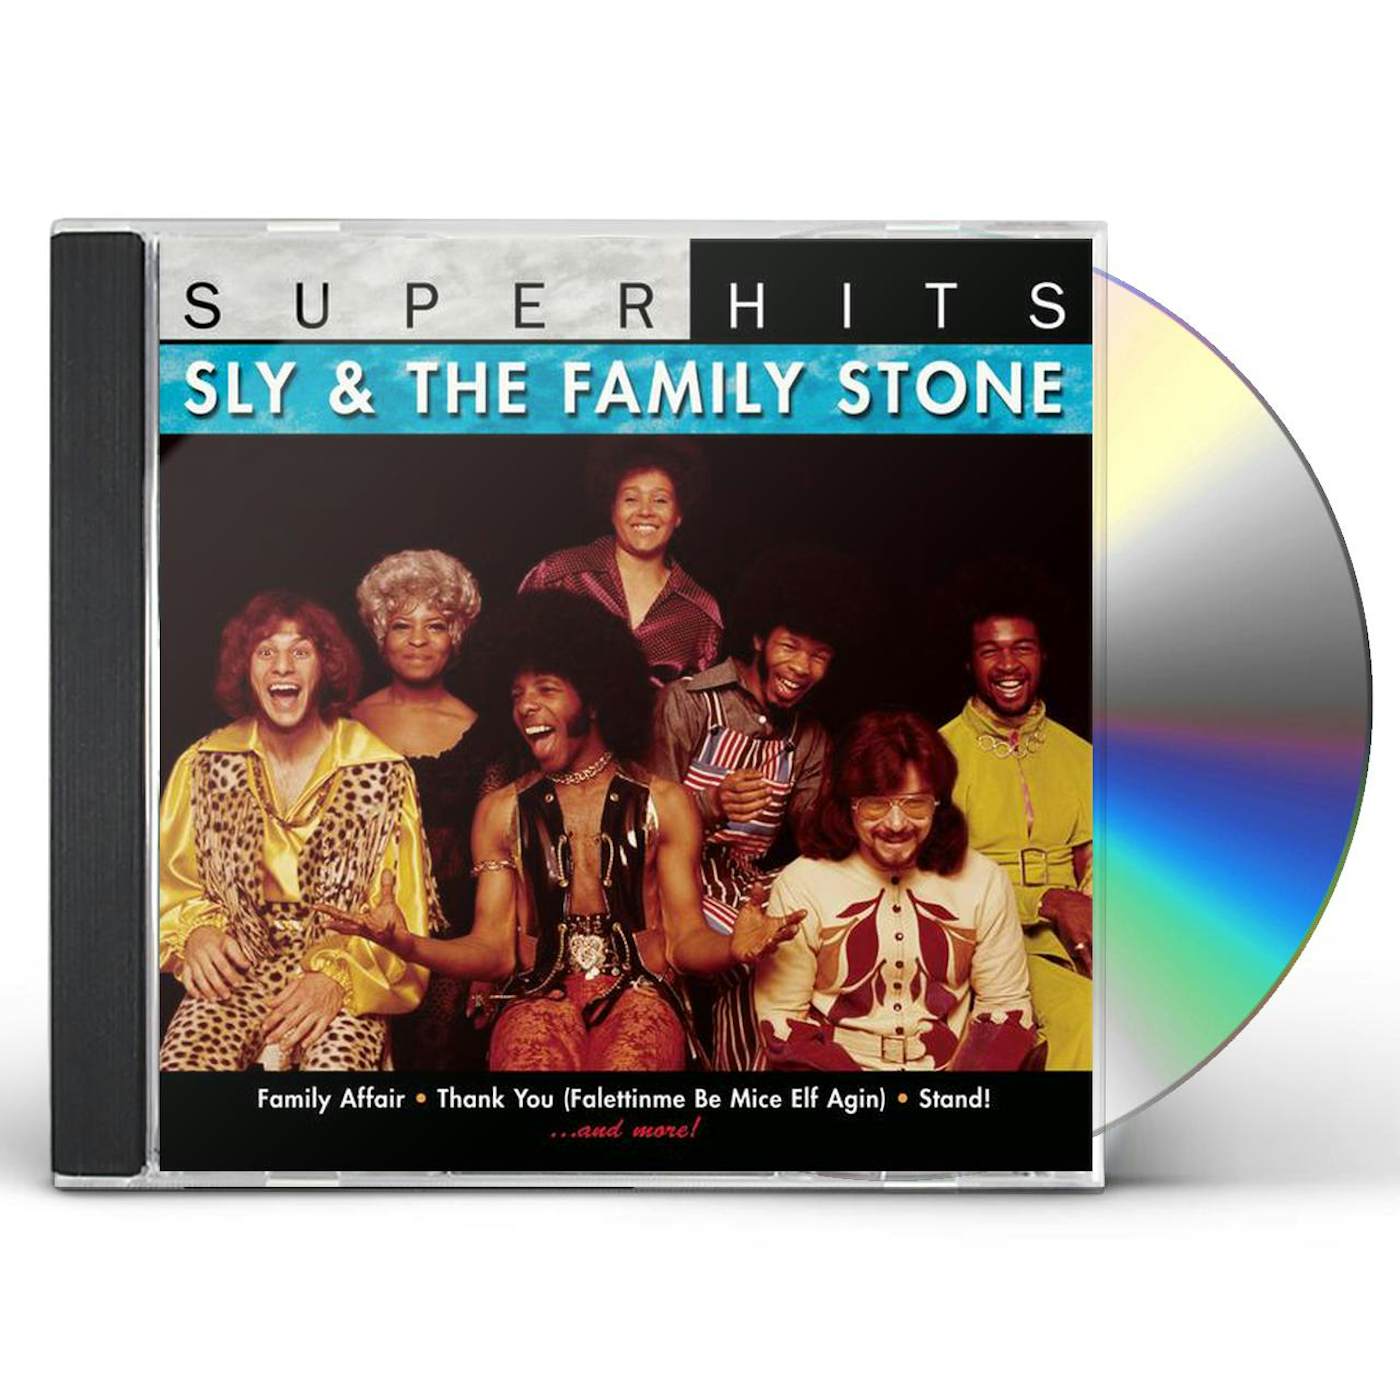 Sly & The Family Stone SUPER HITS CD